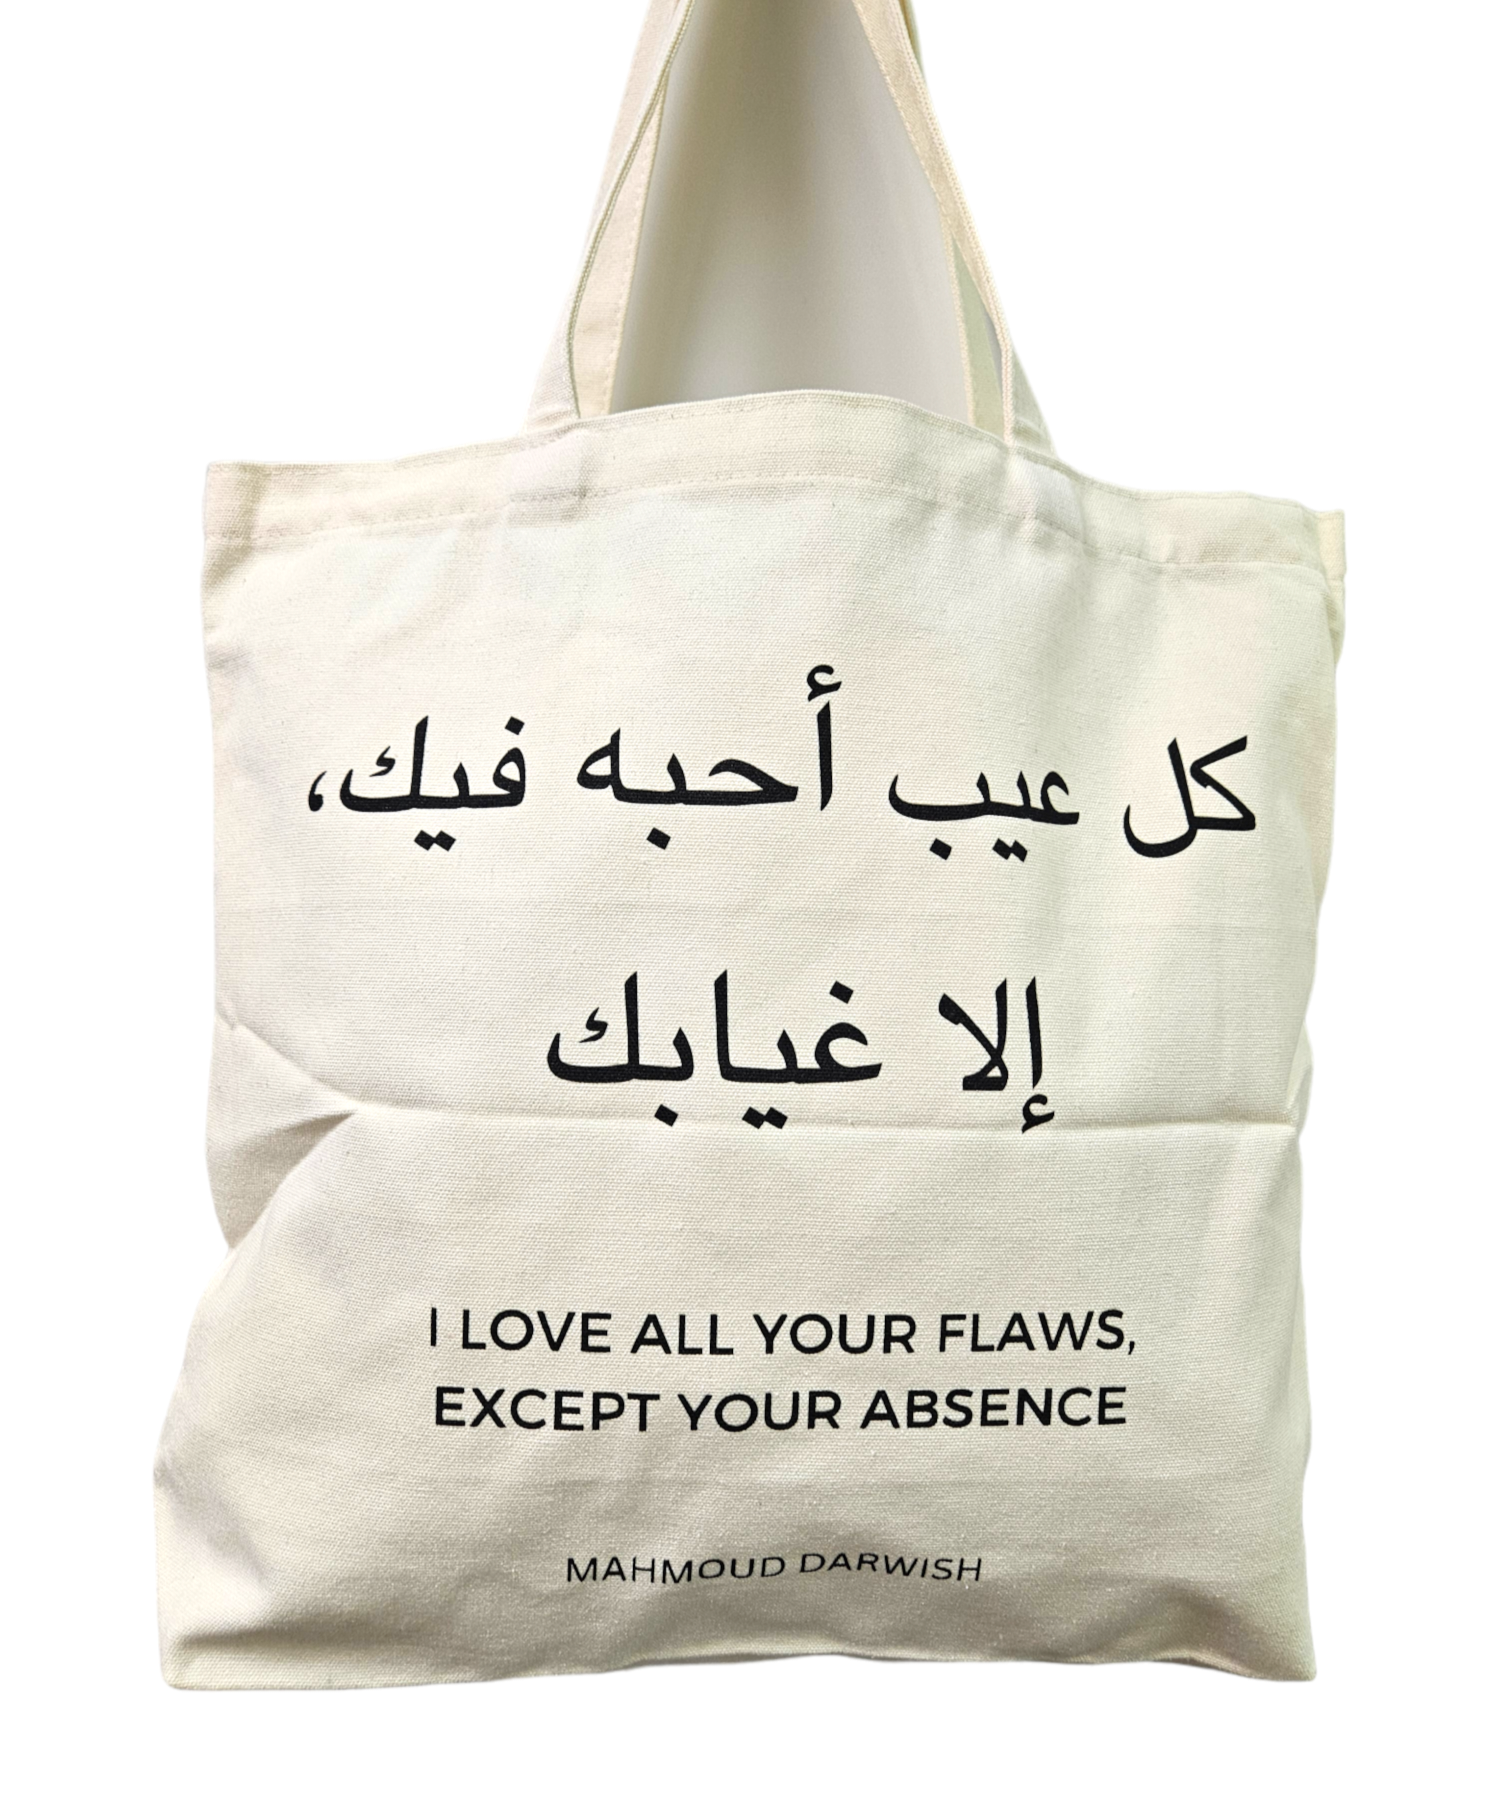 "I Love All Your Flaws" Canvas Tote Bag - Mahmoud Darwish